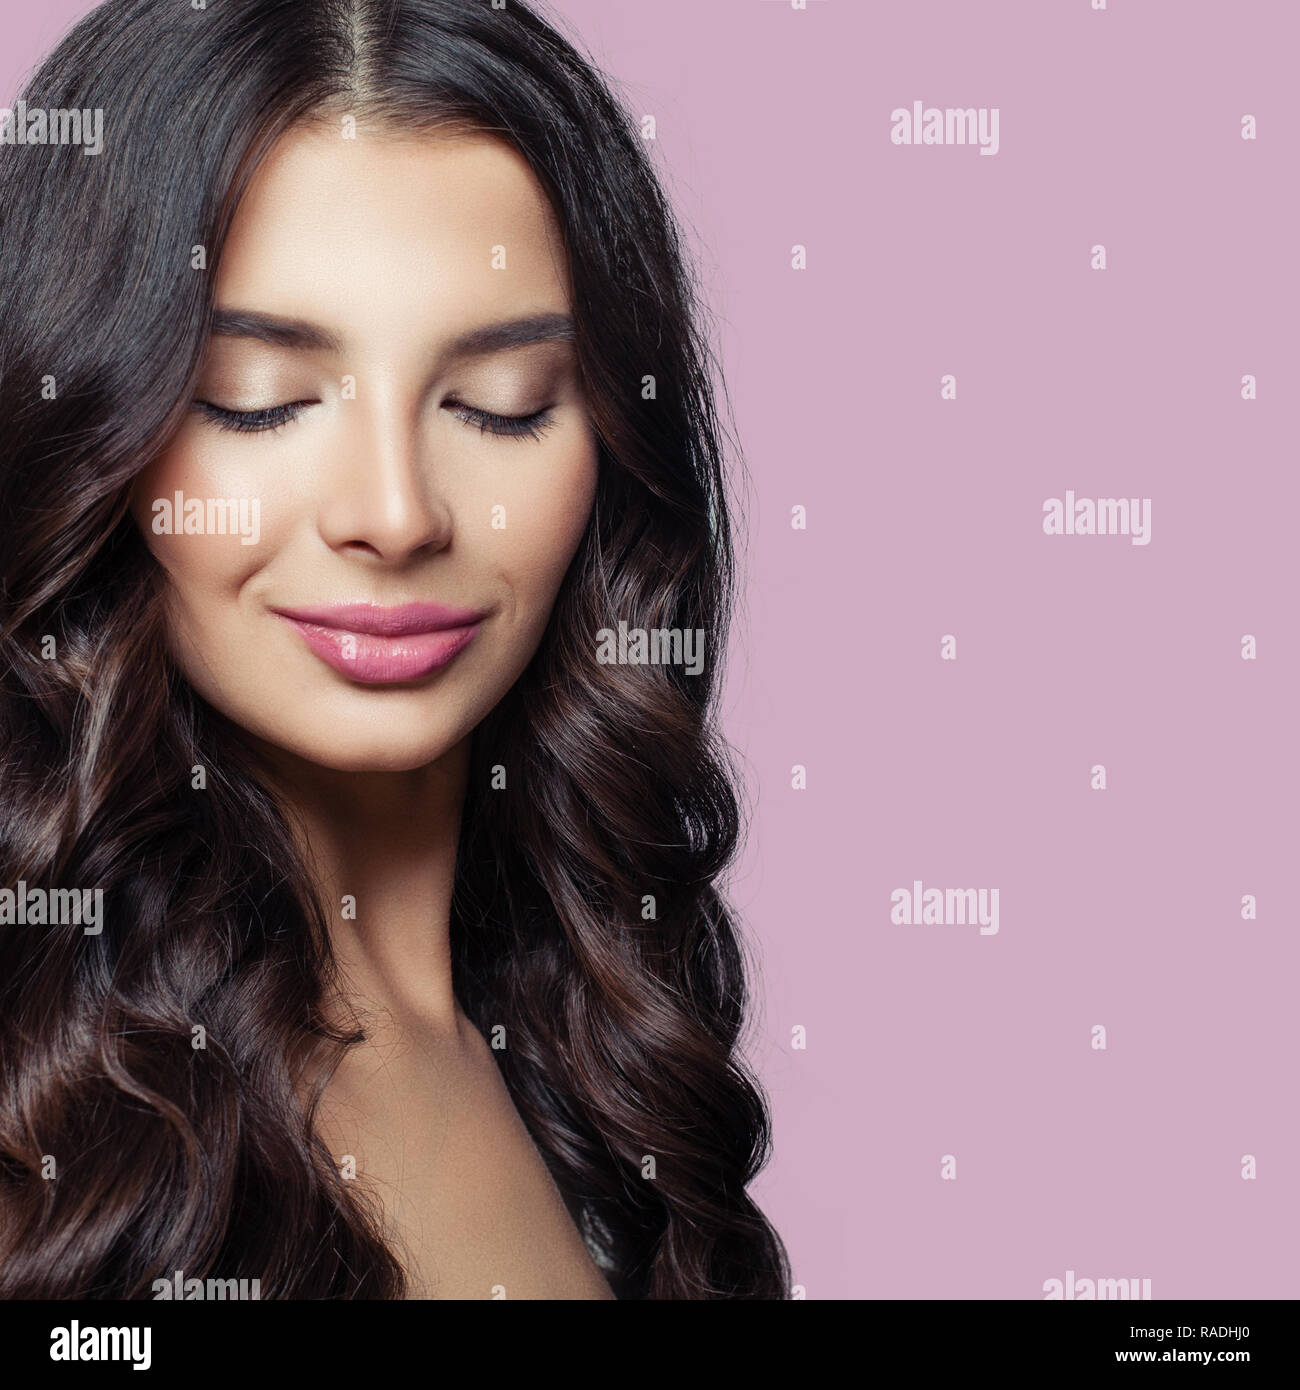 Beauty brunette girl. Young woman with long healthy hair and pink lips makeup on colorful background Stock Photo